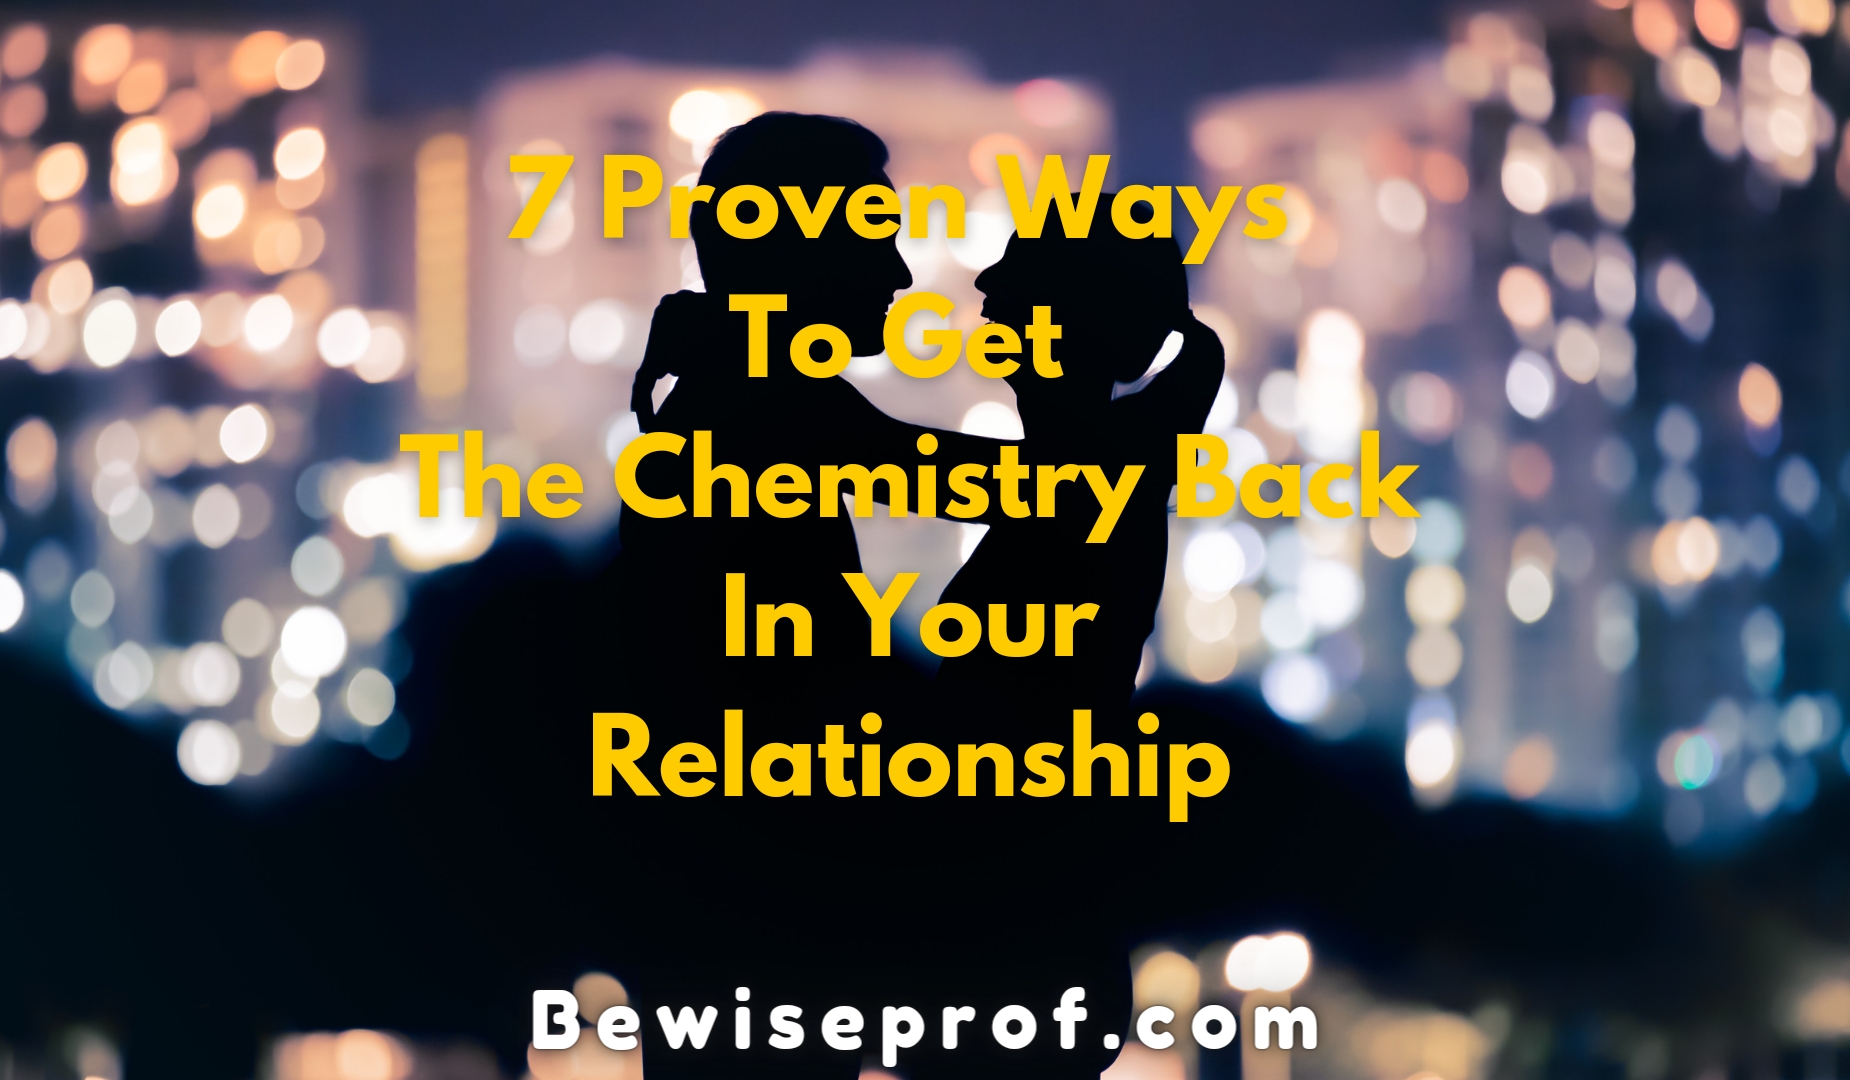 7 Proven Ways To Get The Chemistry Back In Your Relationship